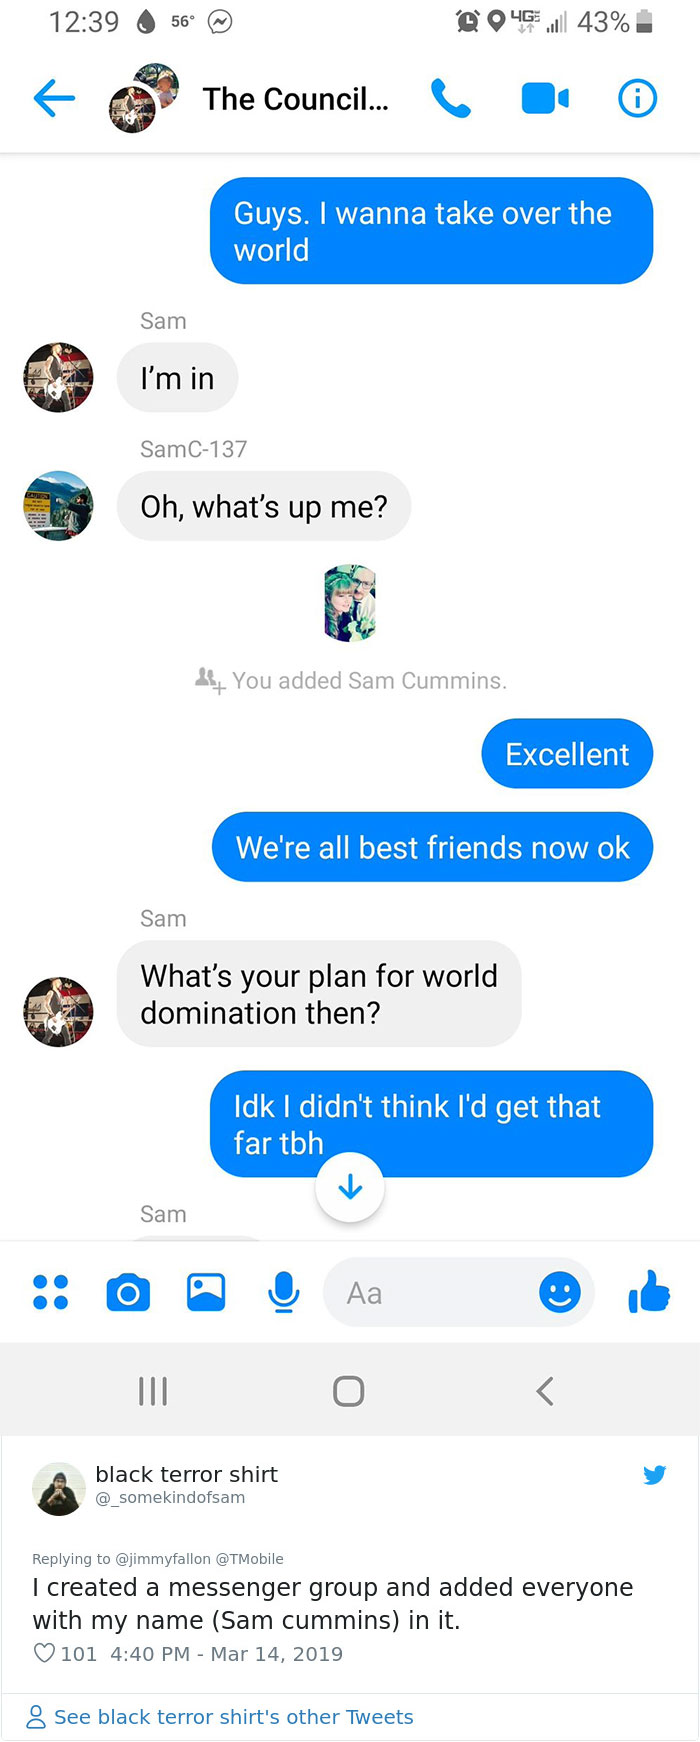 hilarious awkward texts - 6 56 046 43% The Council... Guys. I wanna take over the world Sam I'm in SamC137 Oh, what's up me? If You added Sam Cummins. Excellent We're all best friends now ok Sam What's your plan for world domination then? Idk I didn't thi